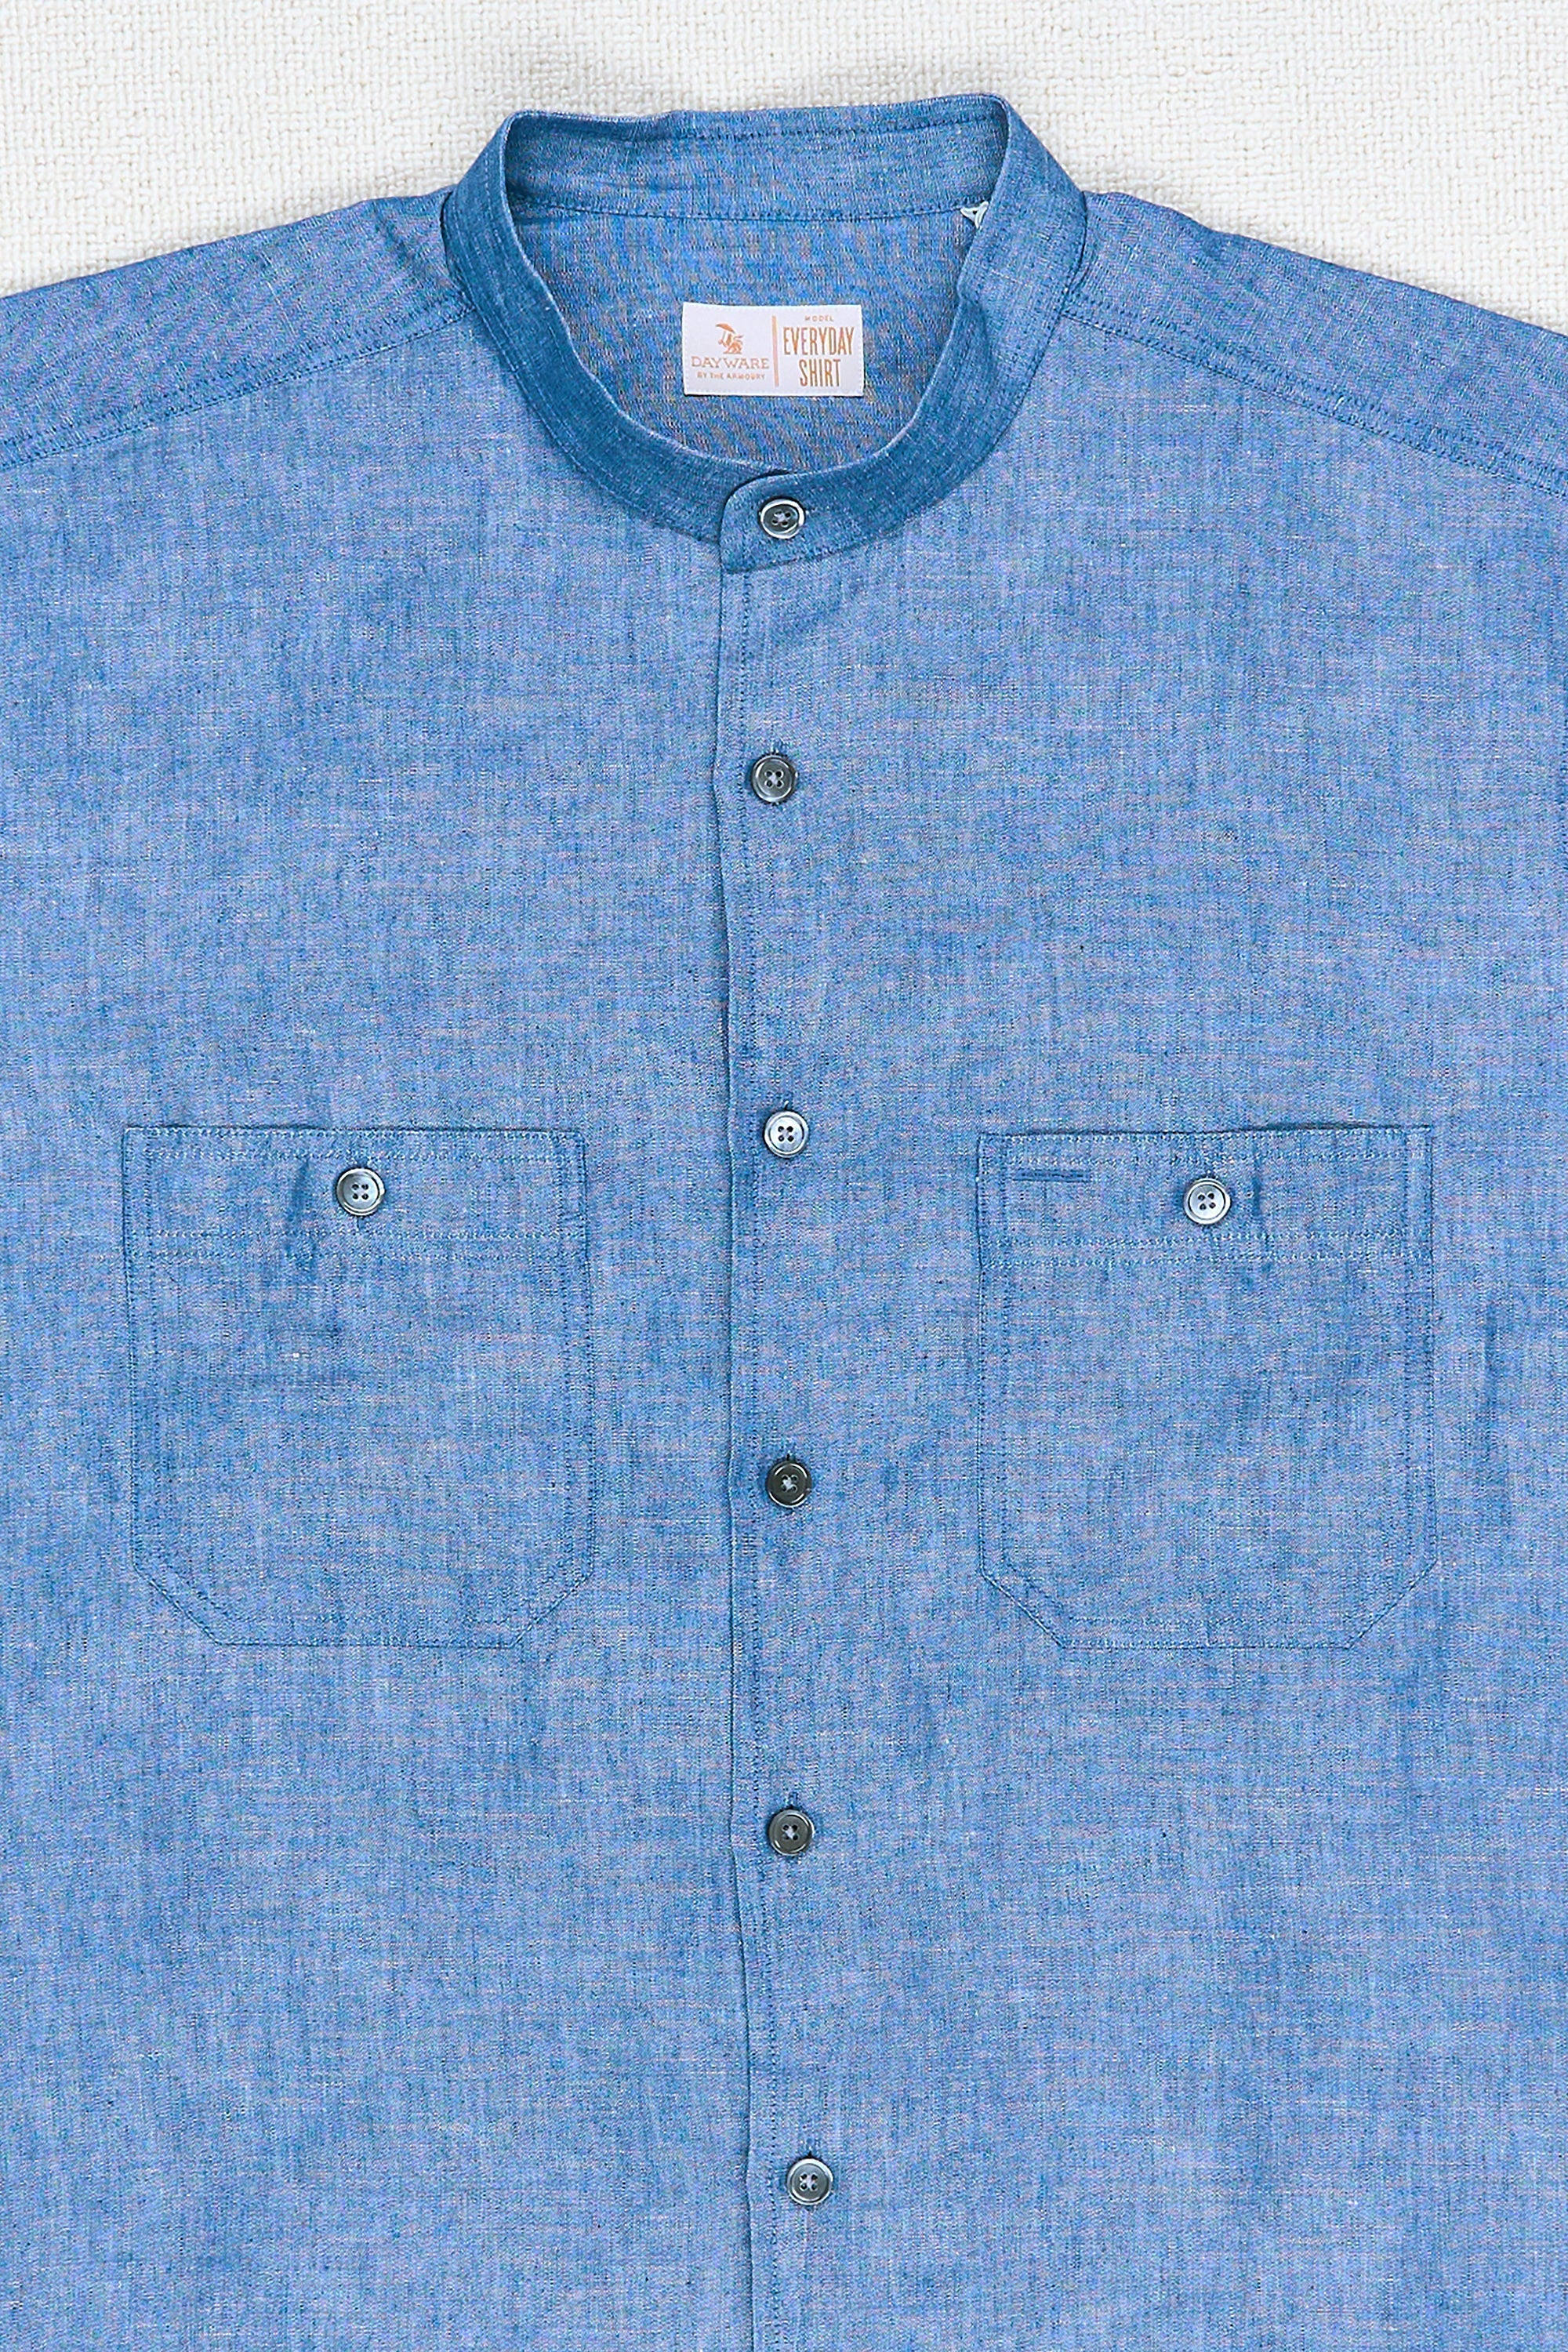 The Armoury Blue Chambray Cotton/Linen Everyday Shirt